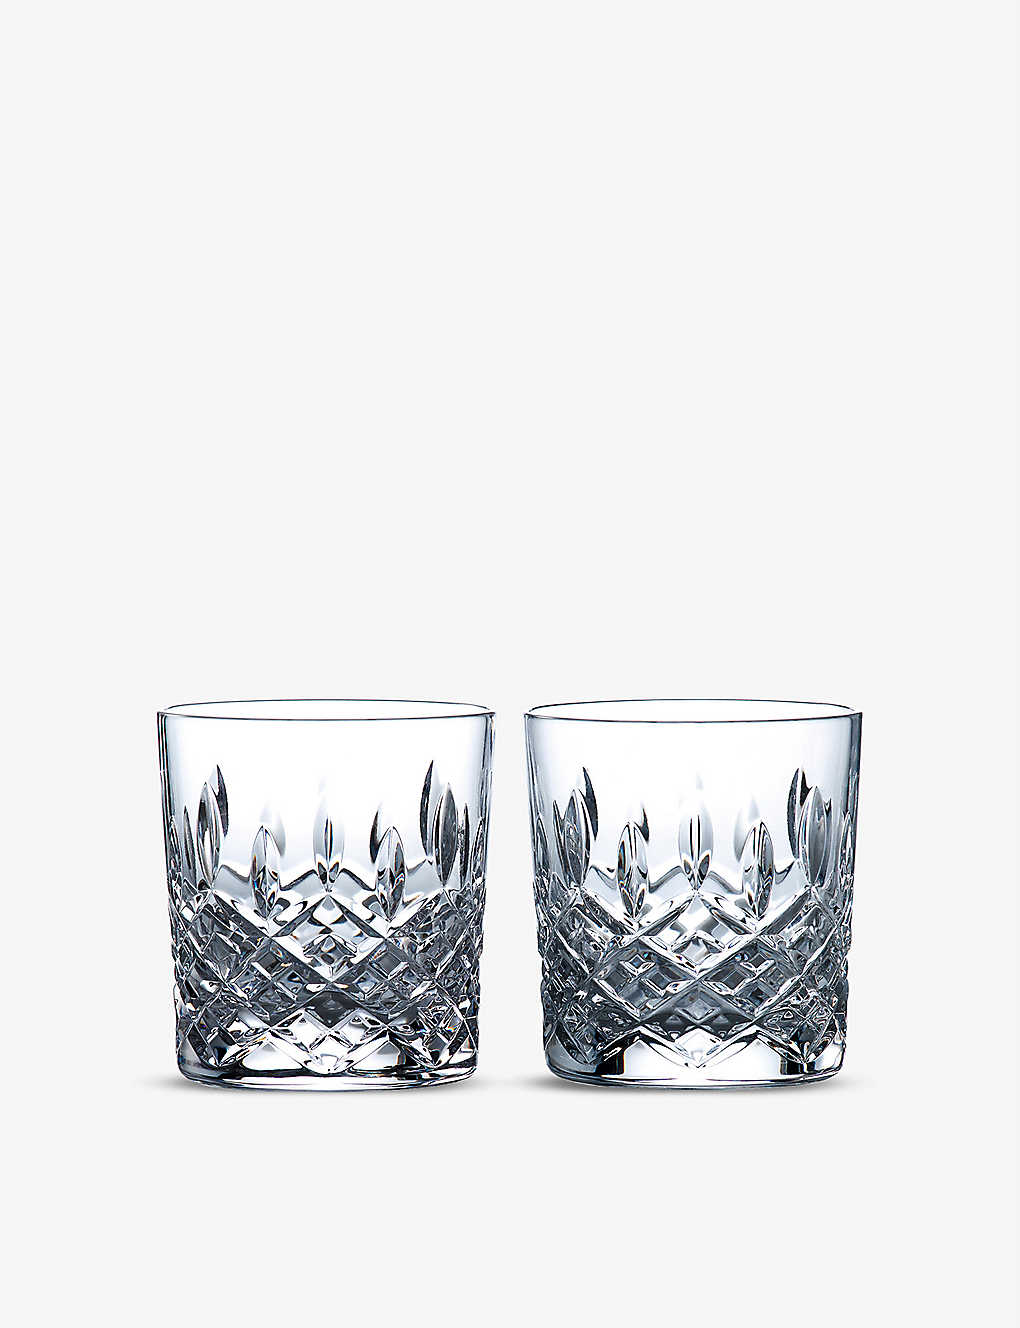 WATERFORD ハイクレア クリスタル タンブラーグラス 2個セット Highclere crystal tumbler glasses set of two